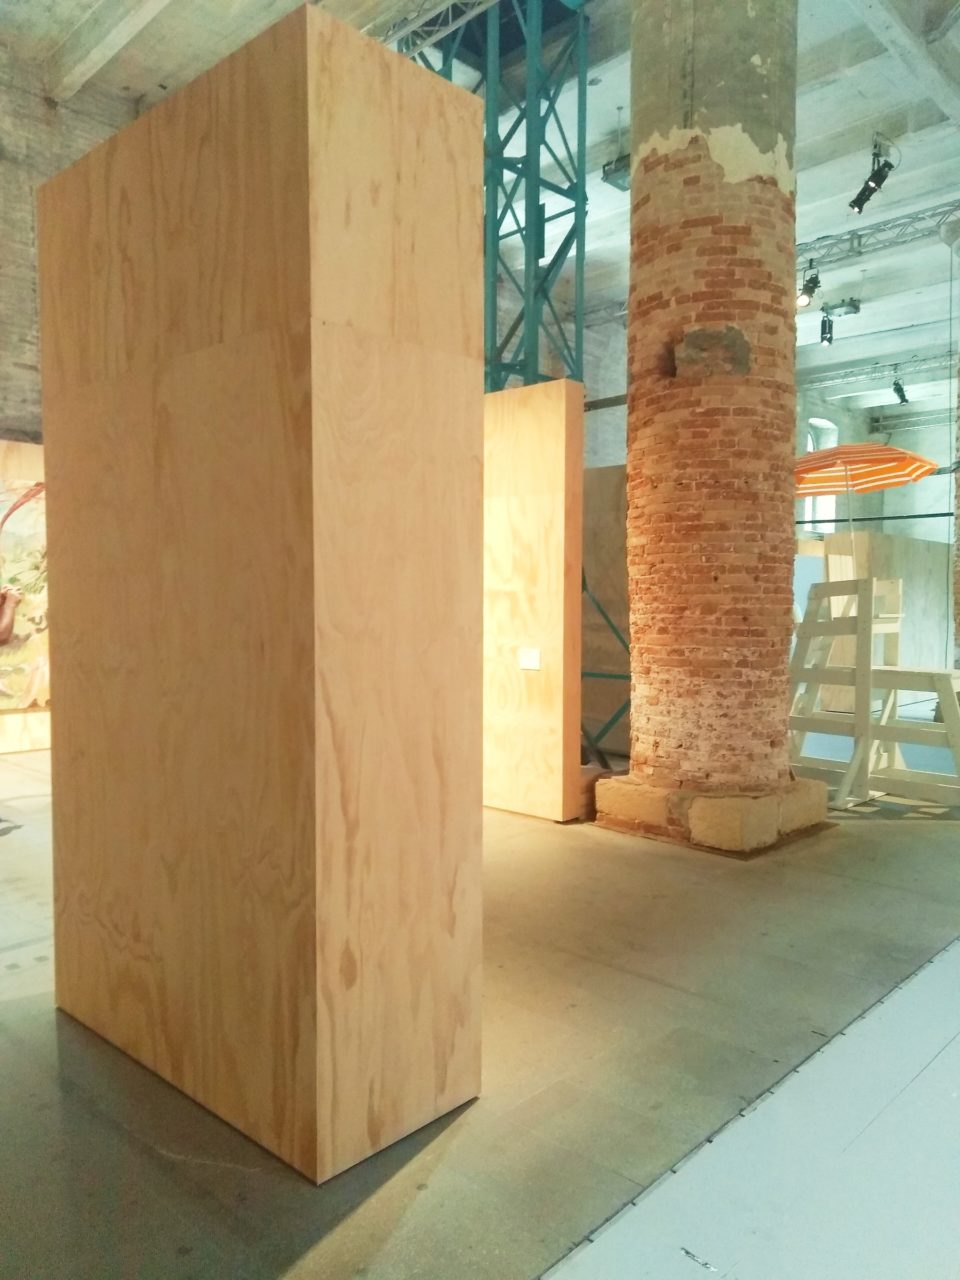 Installation view, locally sourced plywood sheets,metal screws (designed by Delvendahl Martin architects), 2019, NFS